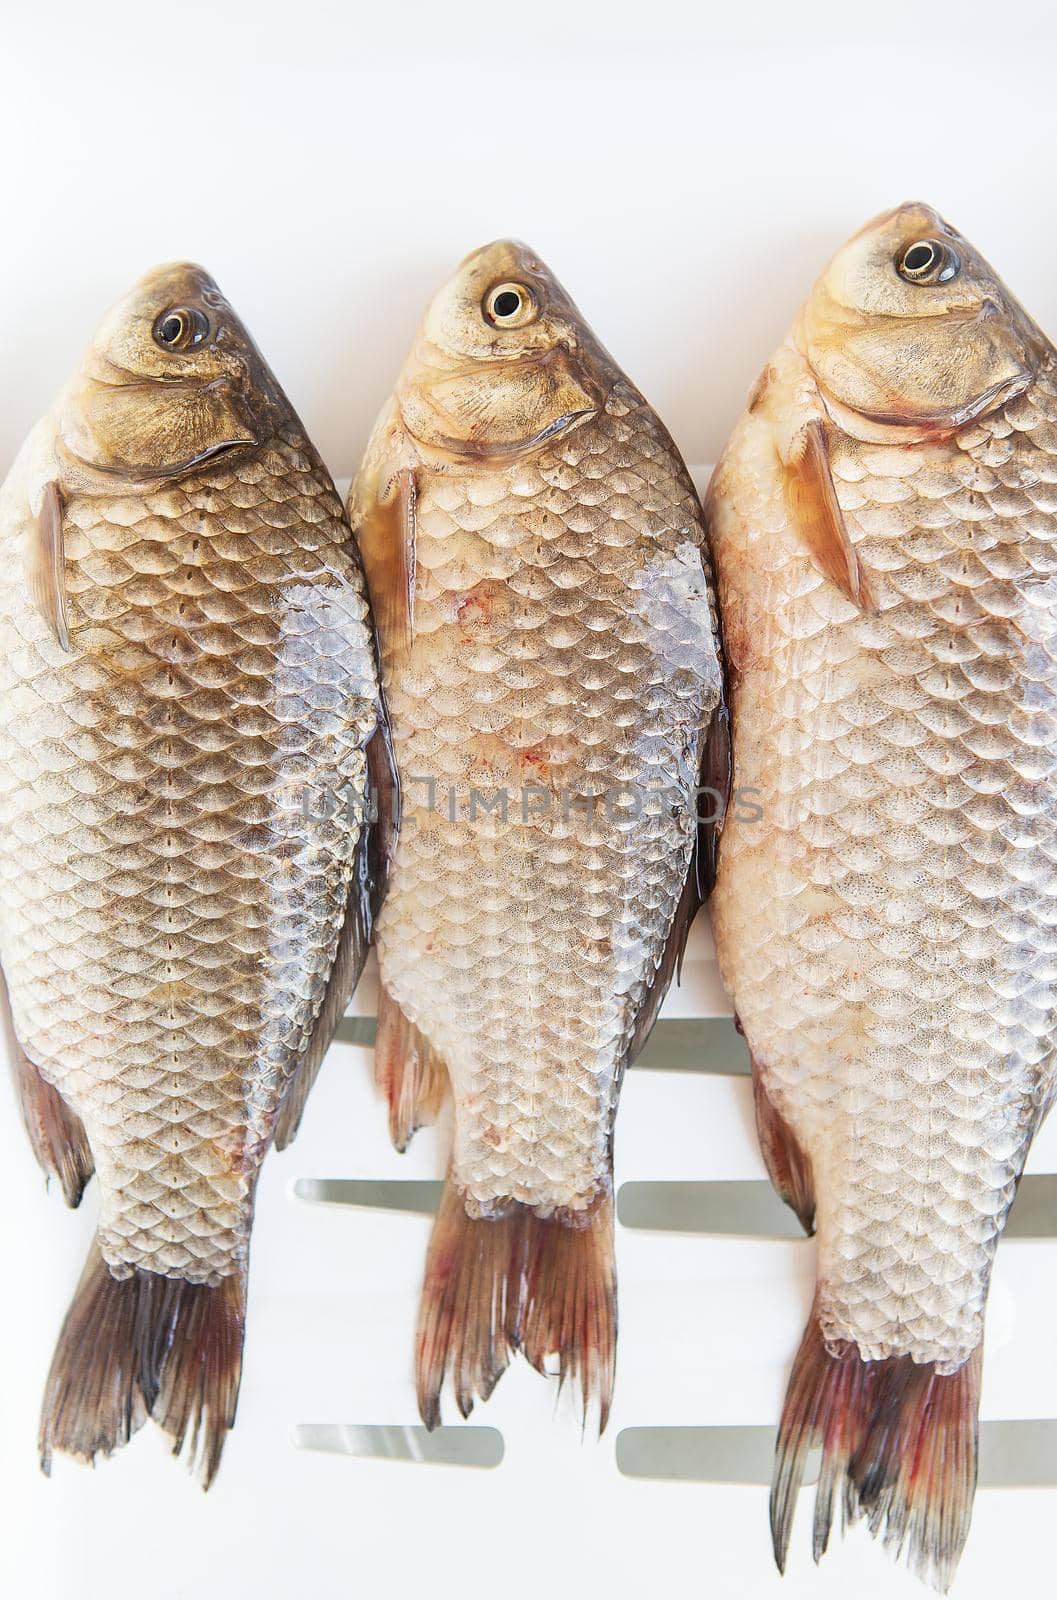 Freshly caught crucian fish lies on a white stand. View from above. by sfinks